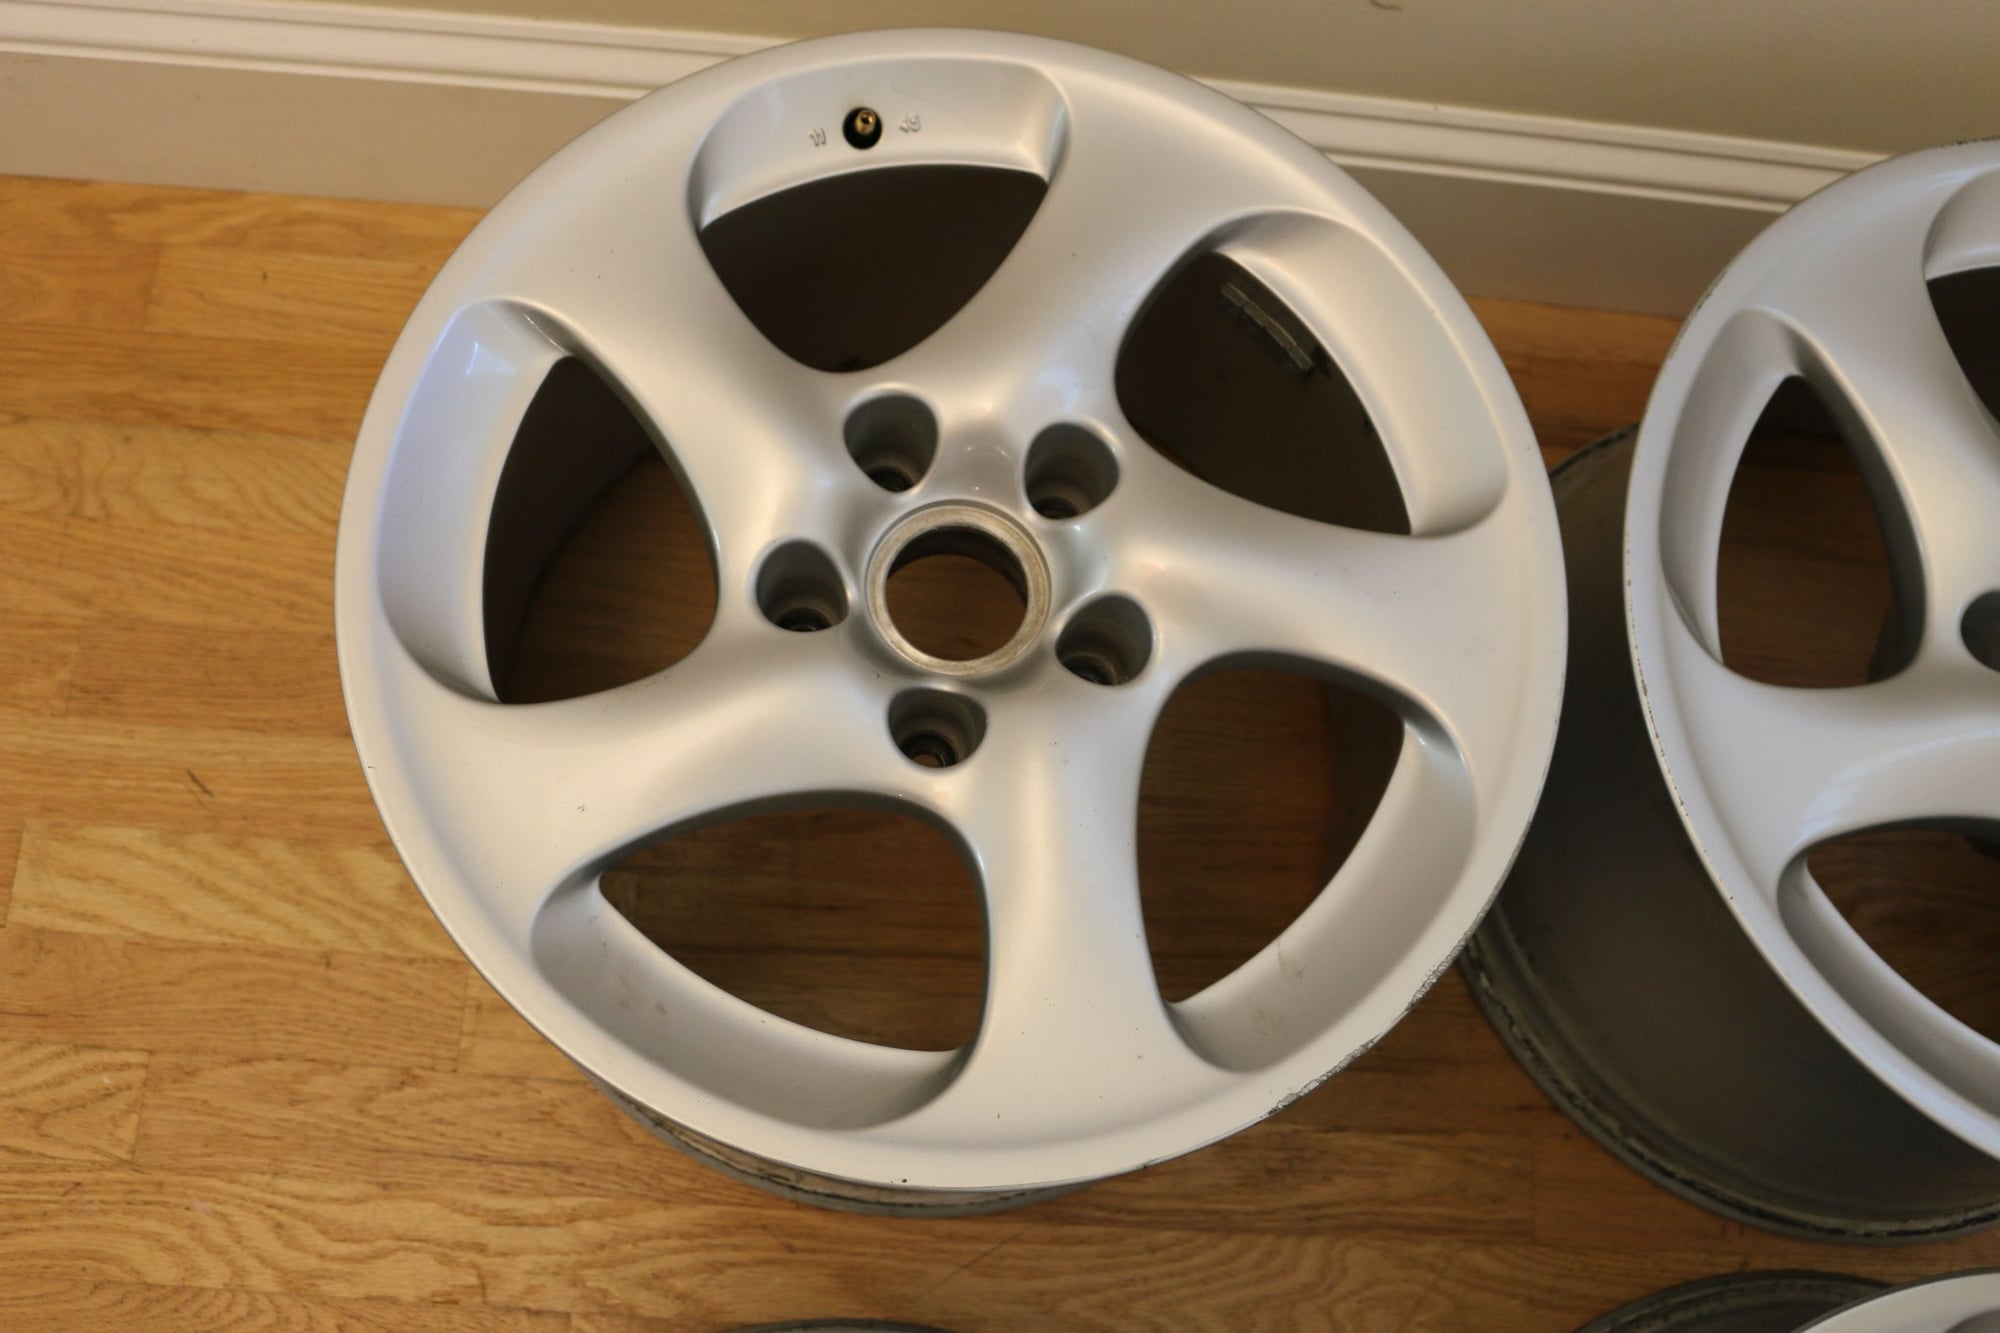 Wheels and Tires/Axles - Porsche twist wheels non hollow spoke 18s staggered - Used - Norcross, GA 30071, United States